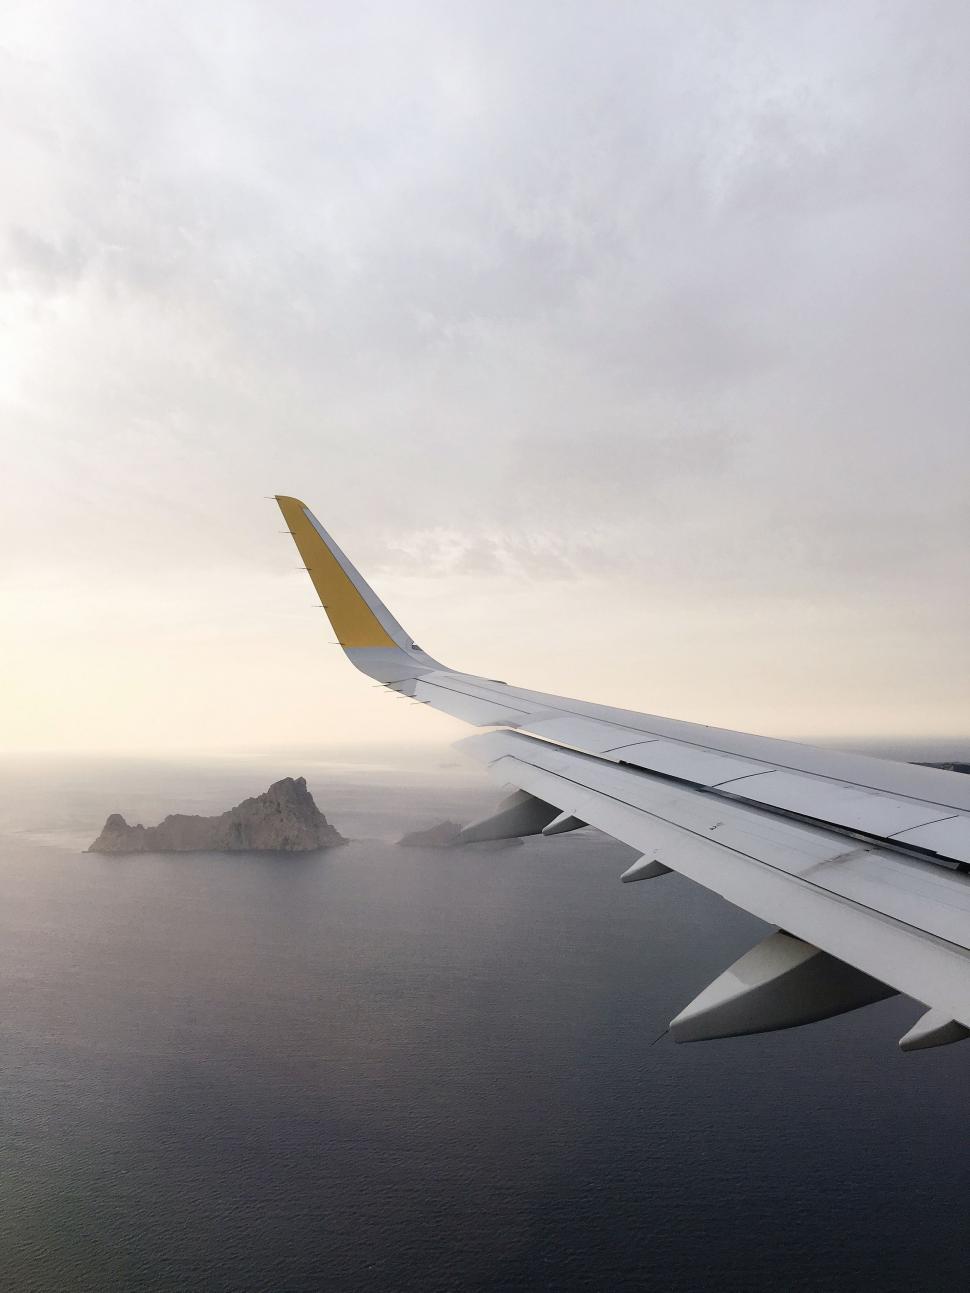 Free Image of Airplane Wing Flying Over Body of Water 